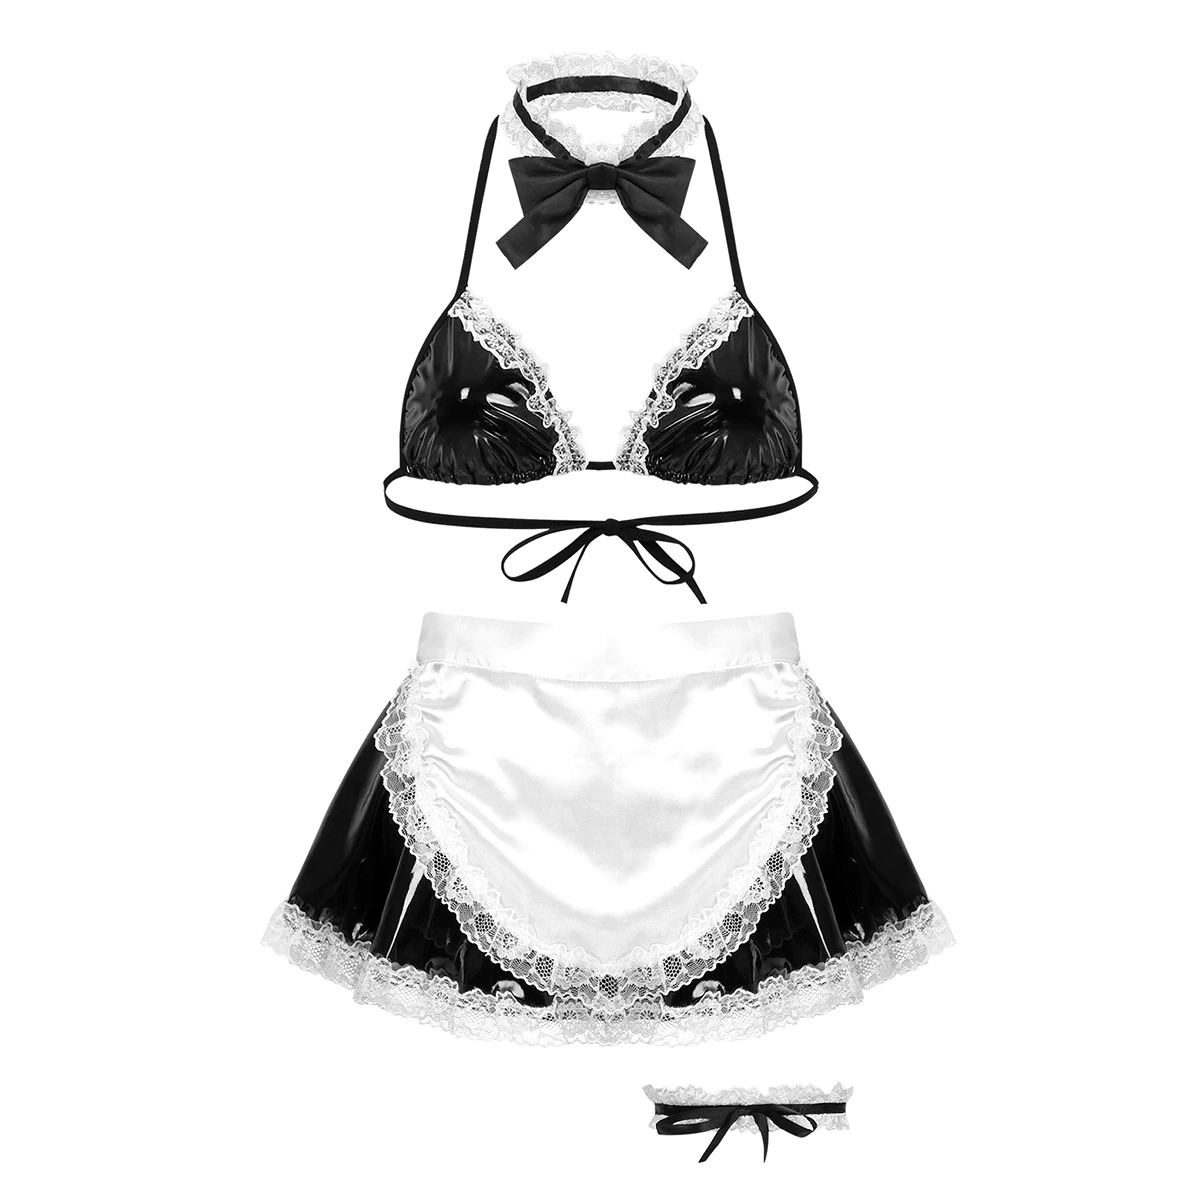 Women Fancy Cosplay Maid Dress / Sexy Exotic Halloween Costume / Bra Top With Skirt And G-Strings - EVE's SECRETS